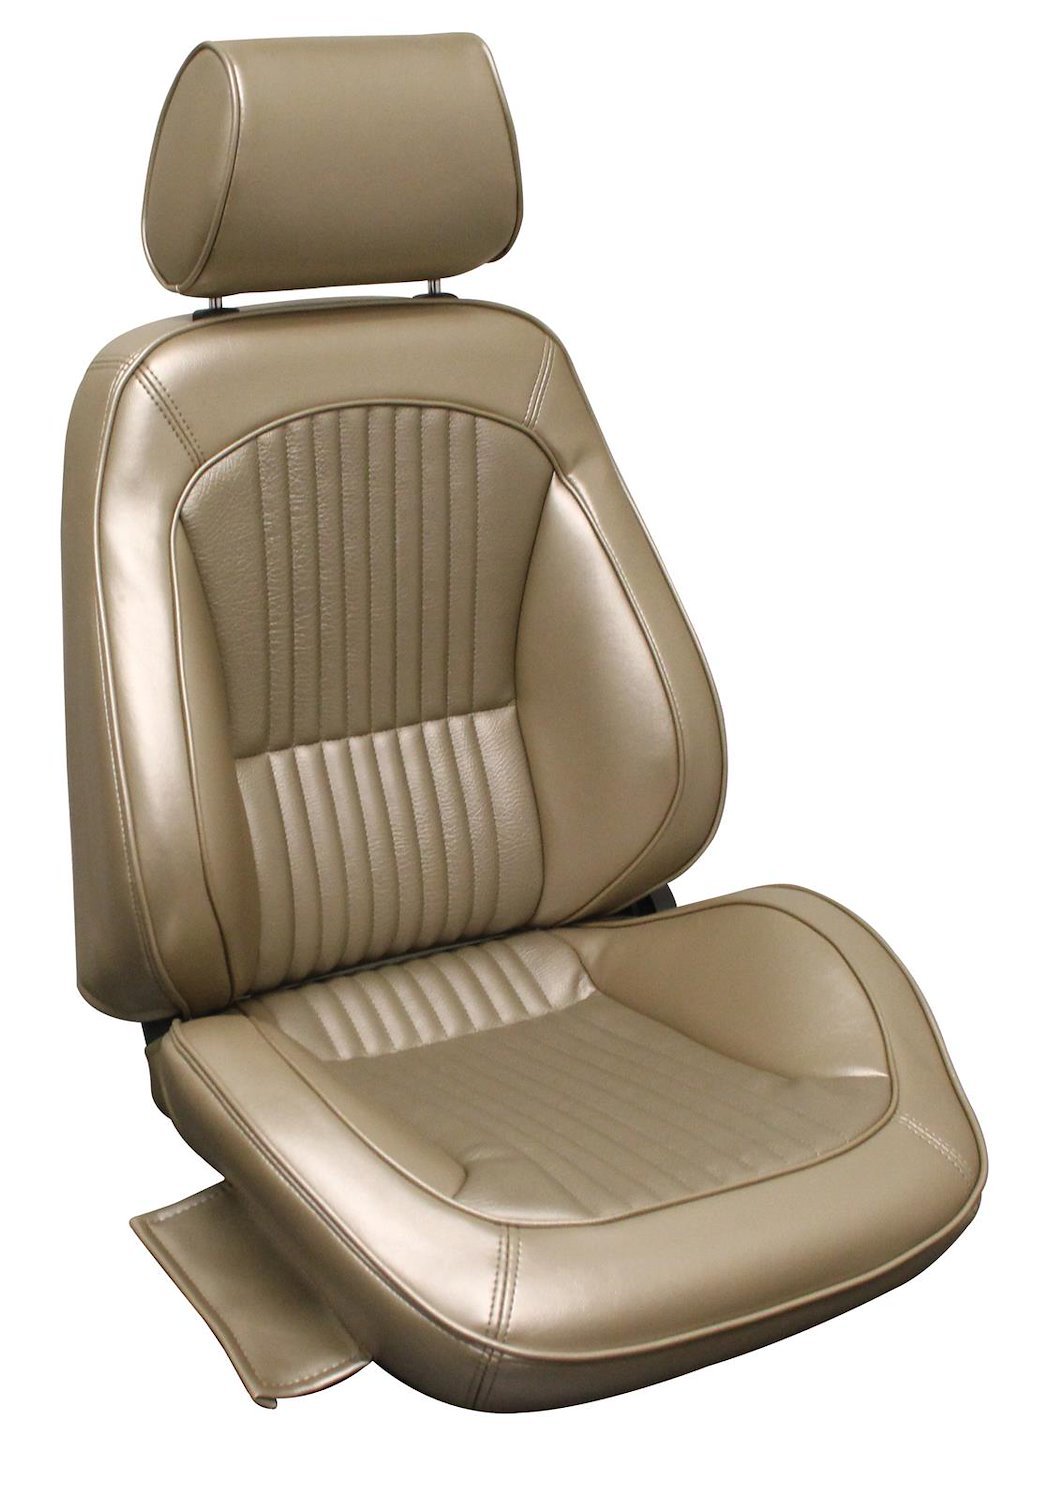 1968 Ford Mustang Standard Interior Saddle Touring II Preassembled Reclining Front Bucket Seats